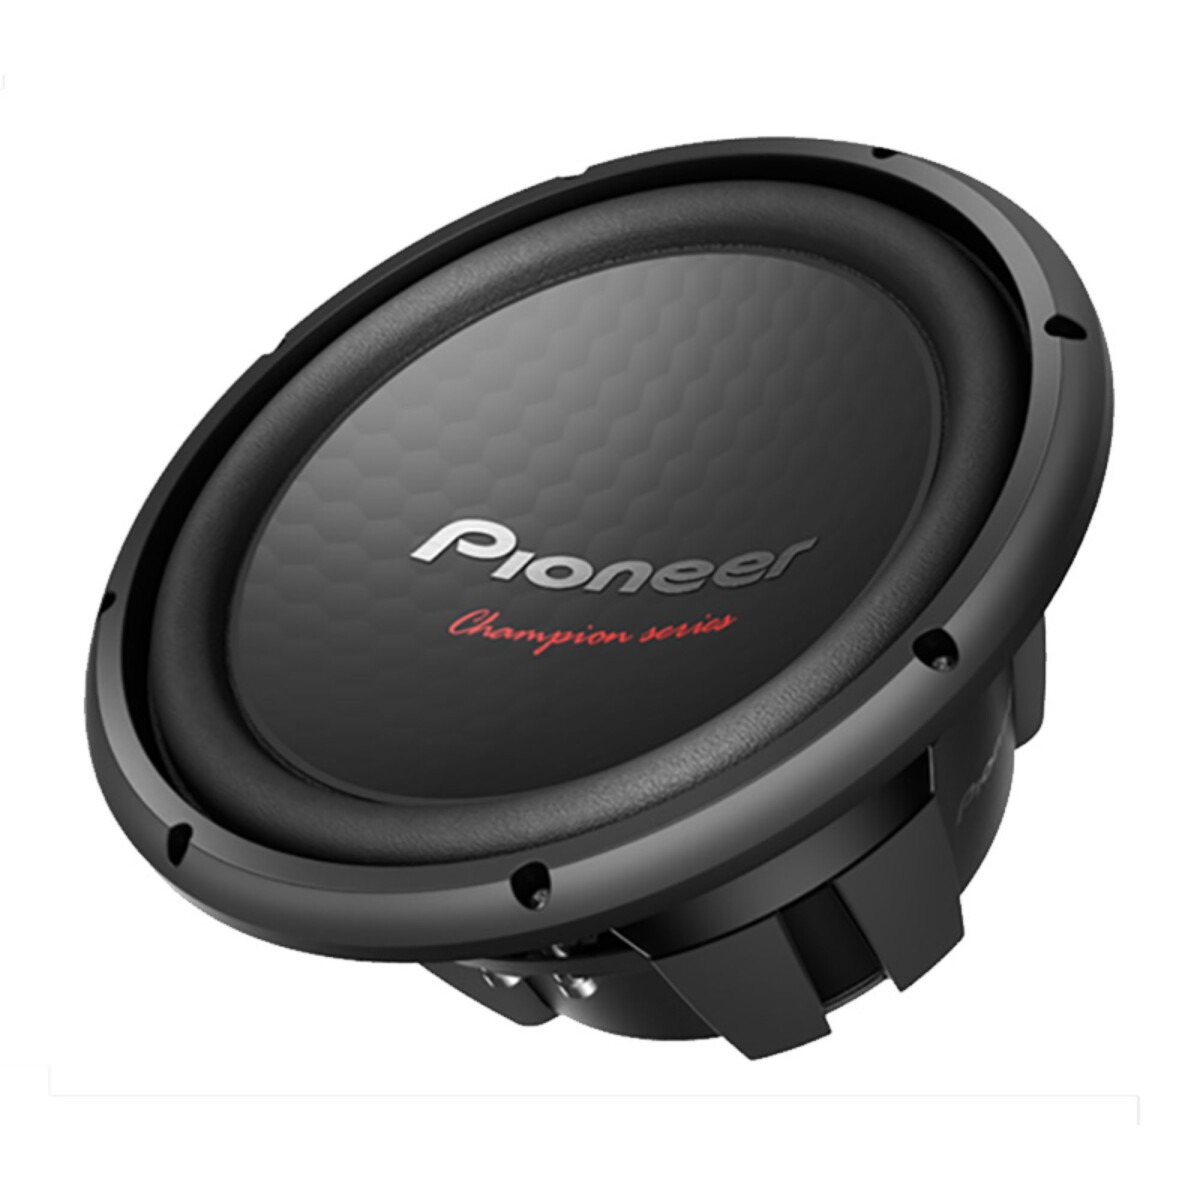 Parlante Pioneer TS-W312D4 Subwoofer 